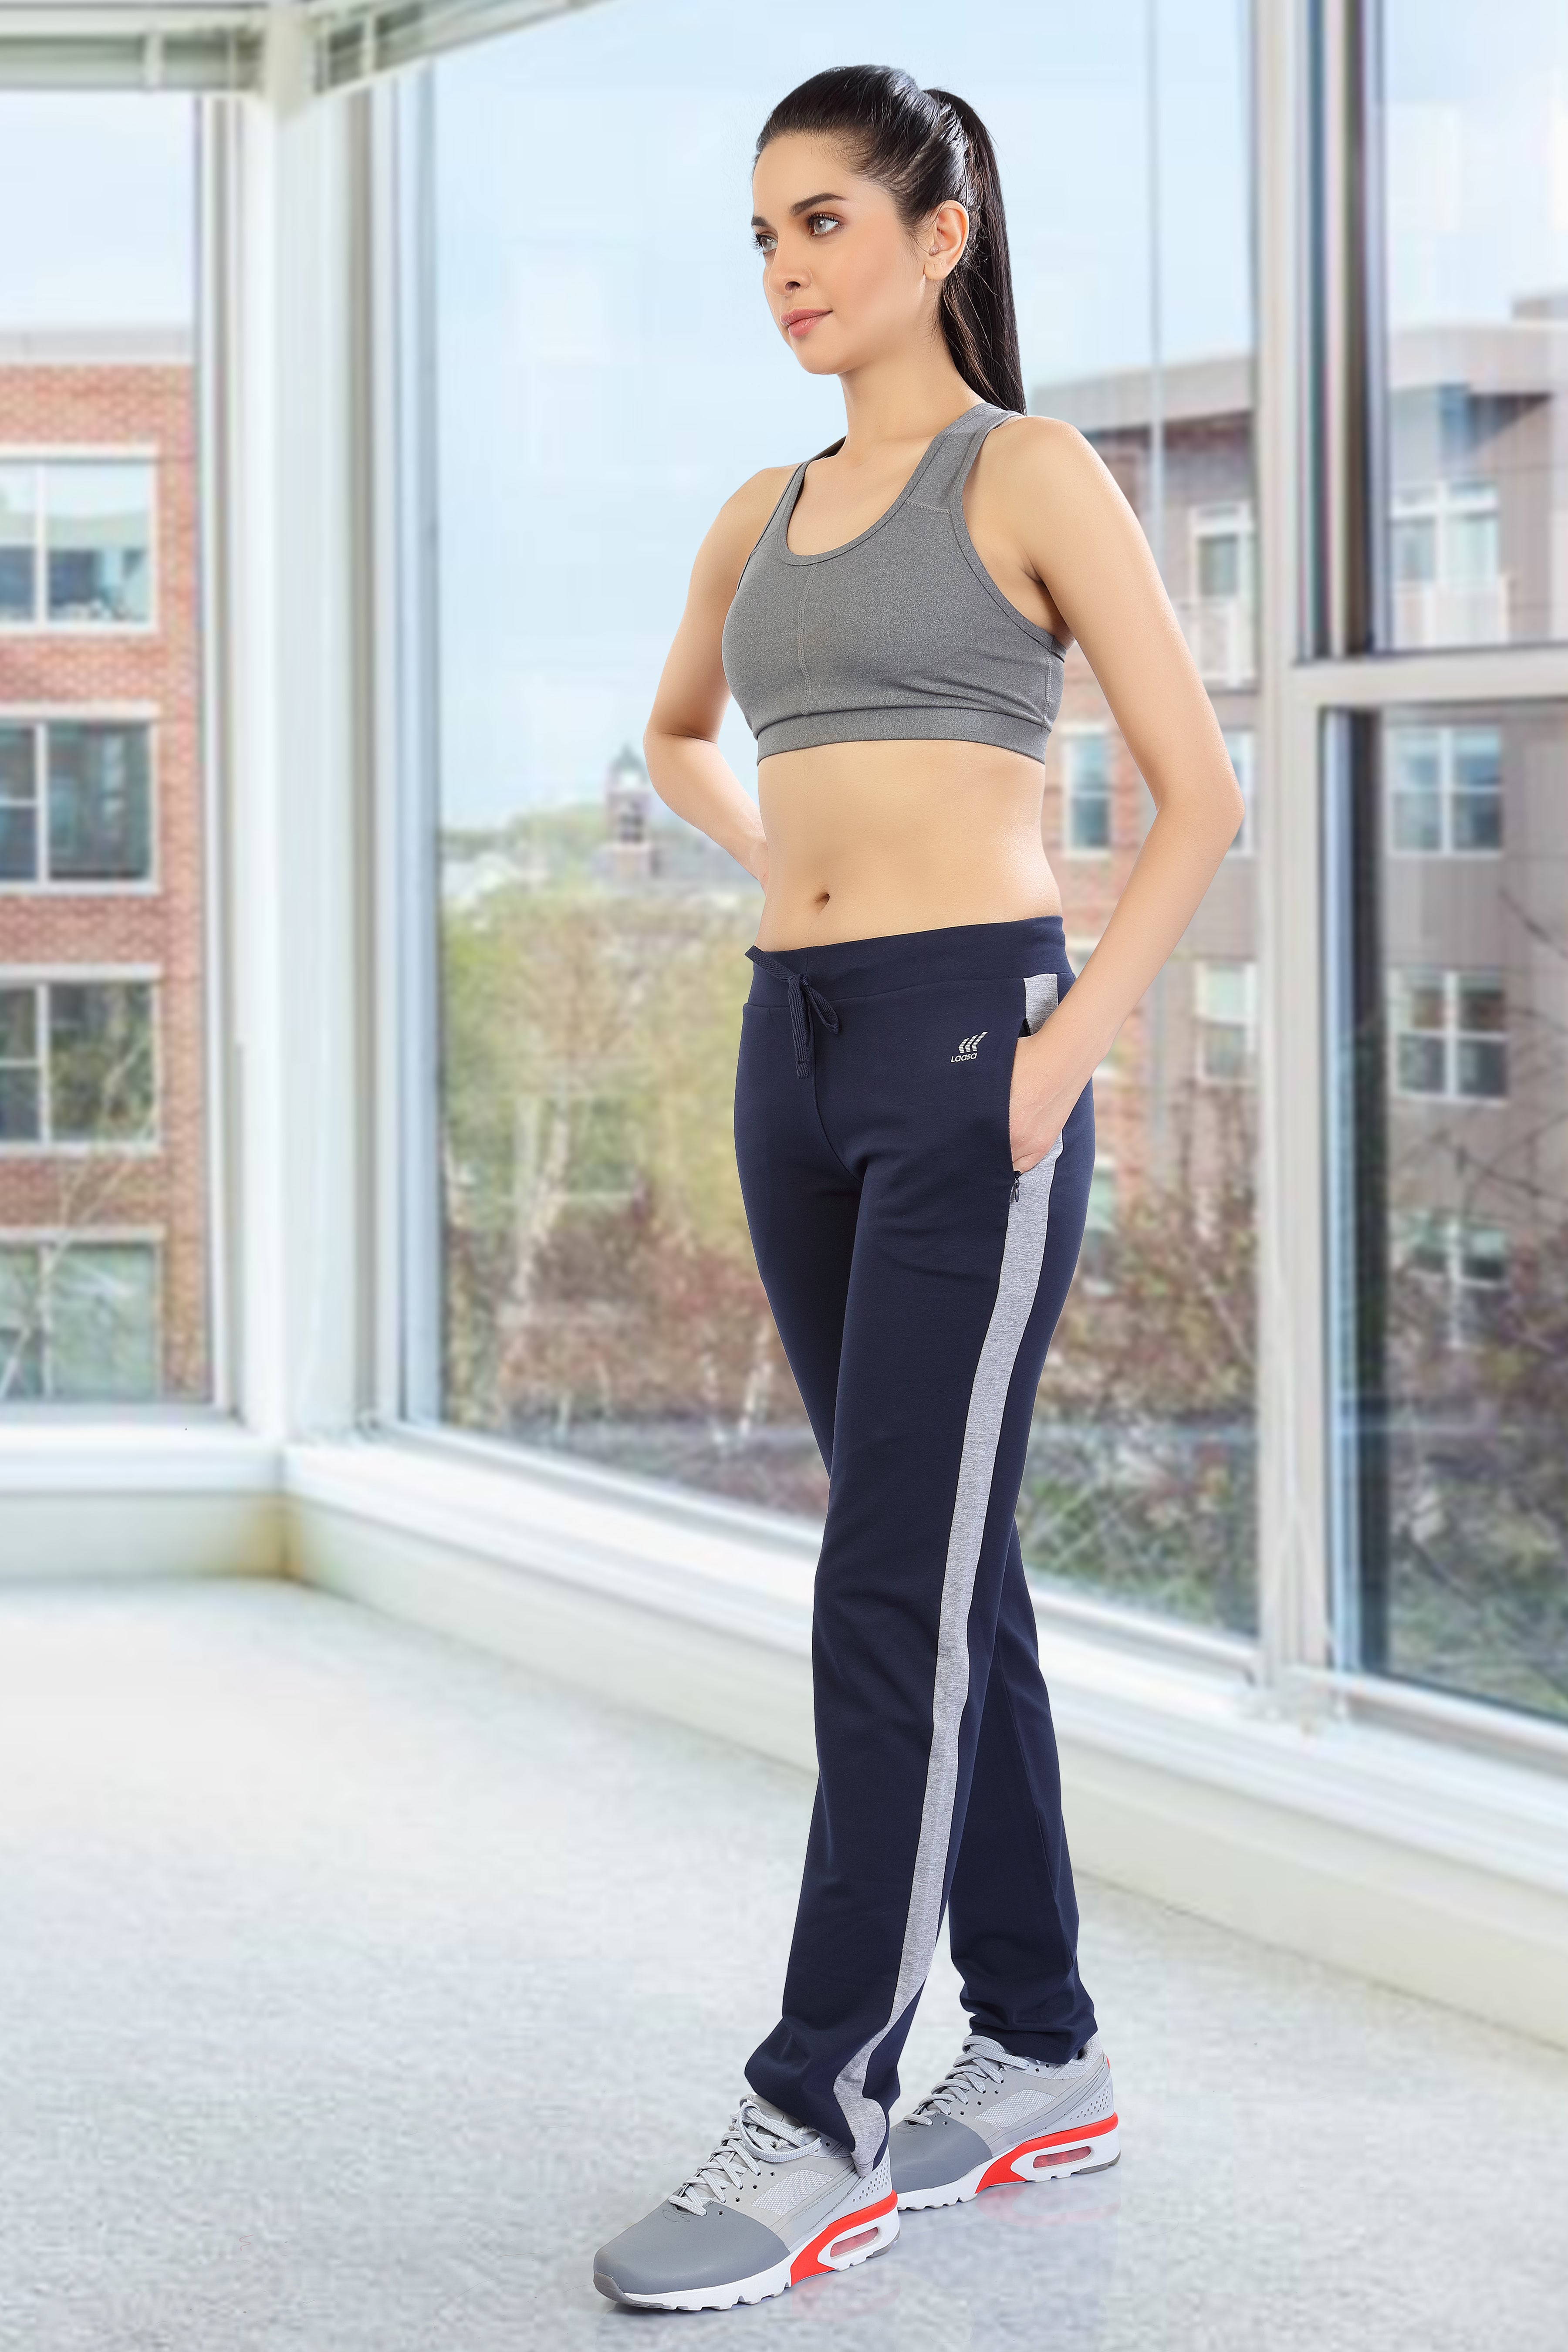 Best Sweatpants for Women: 12 Options for Errands, Workouts, and More |  TIME Stamped